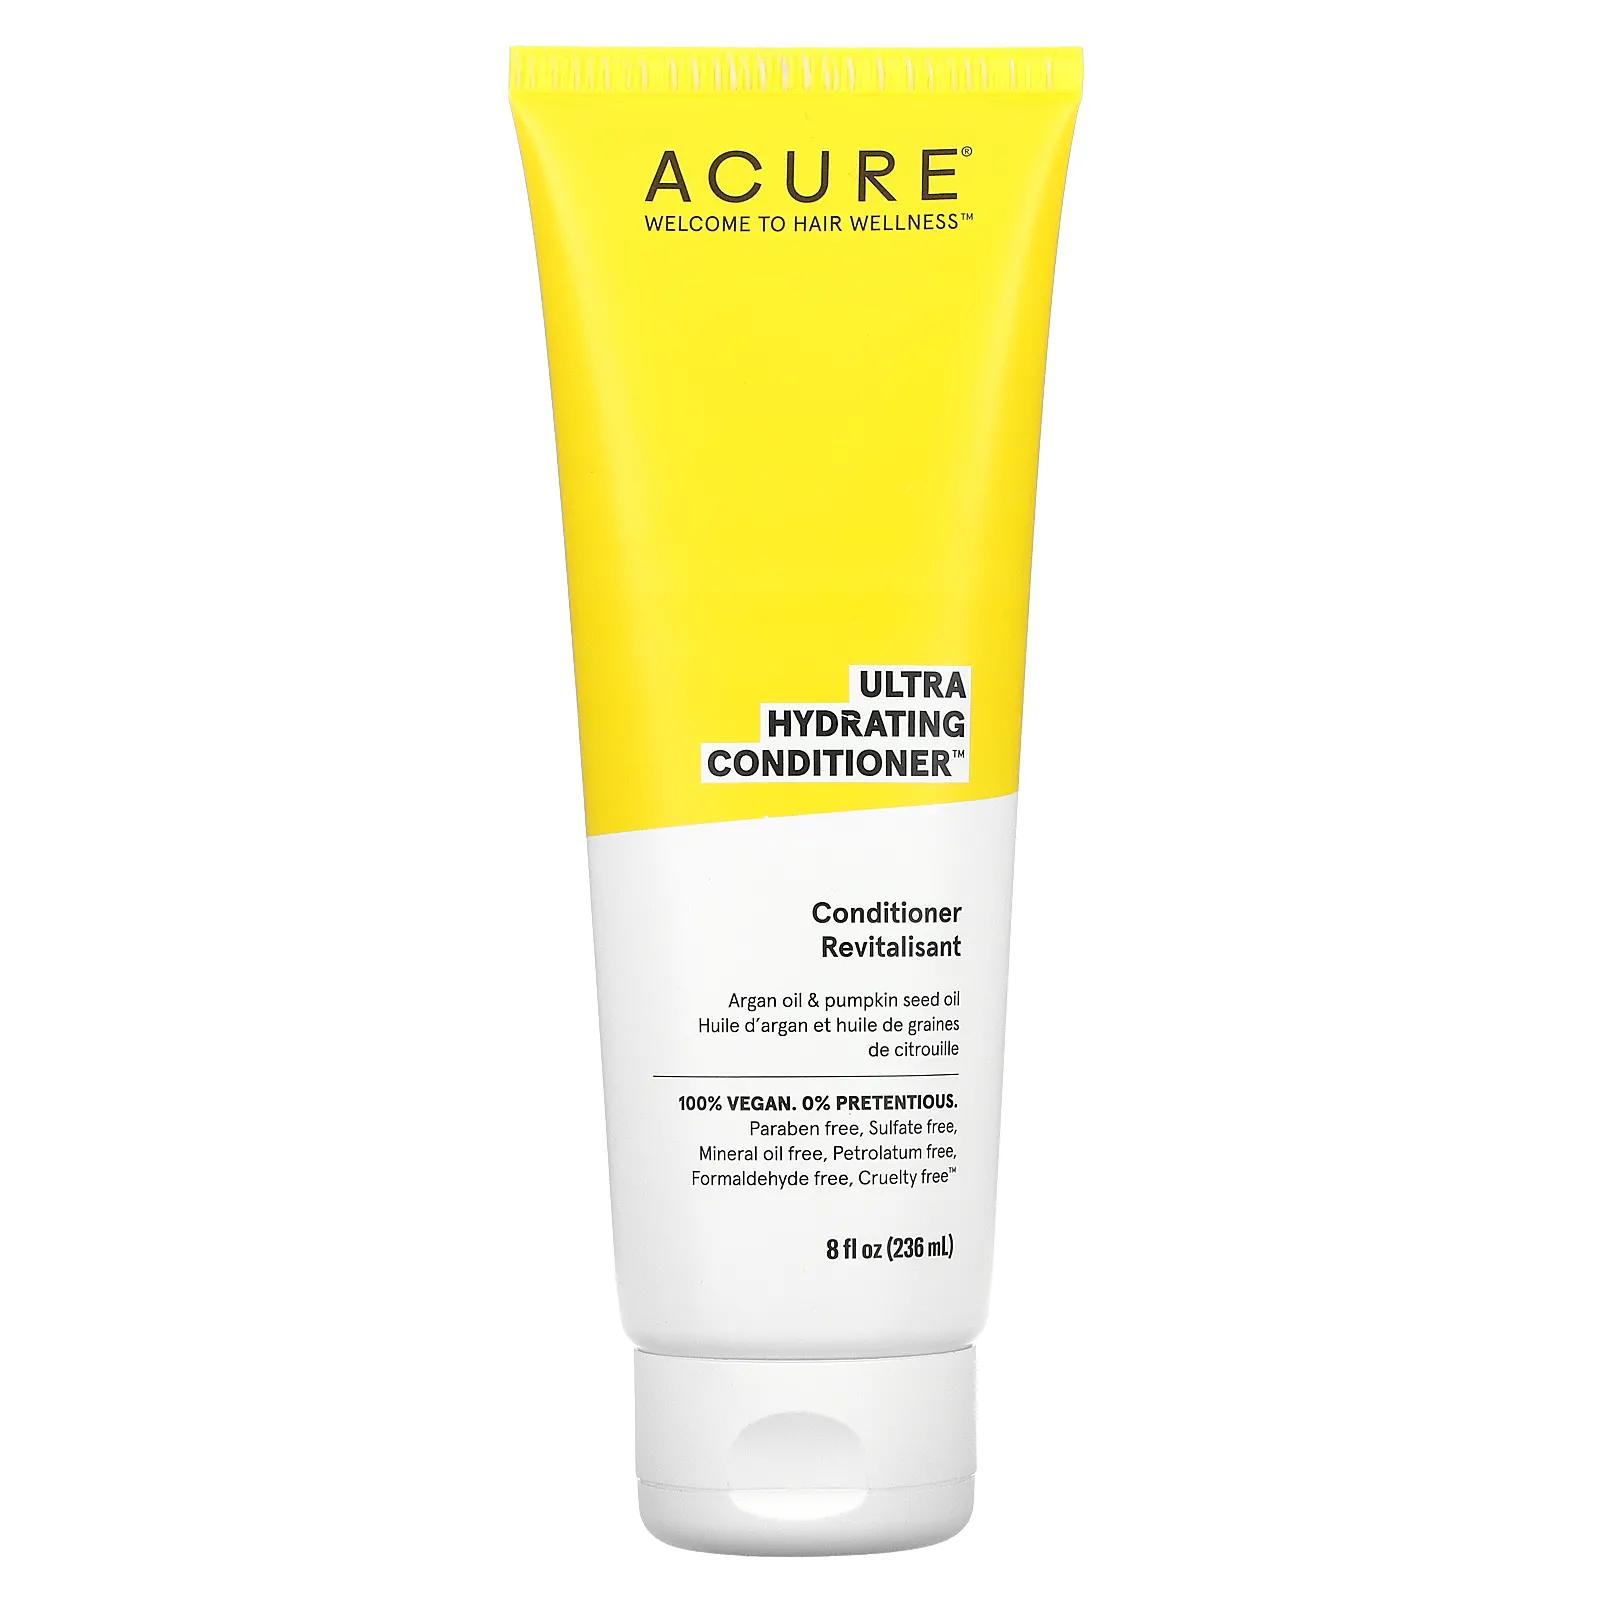 Acure Ultra Hydrating Conditioner Argan Oil & Pumpkin 8 fl oz (236.5 ml) acure ultra hydrating conditioner argan oil